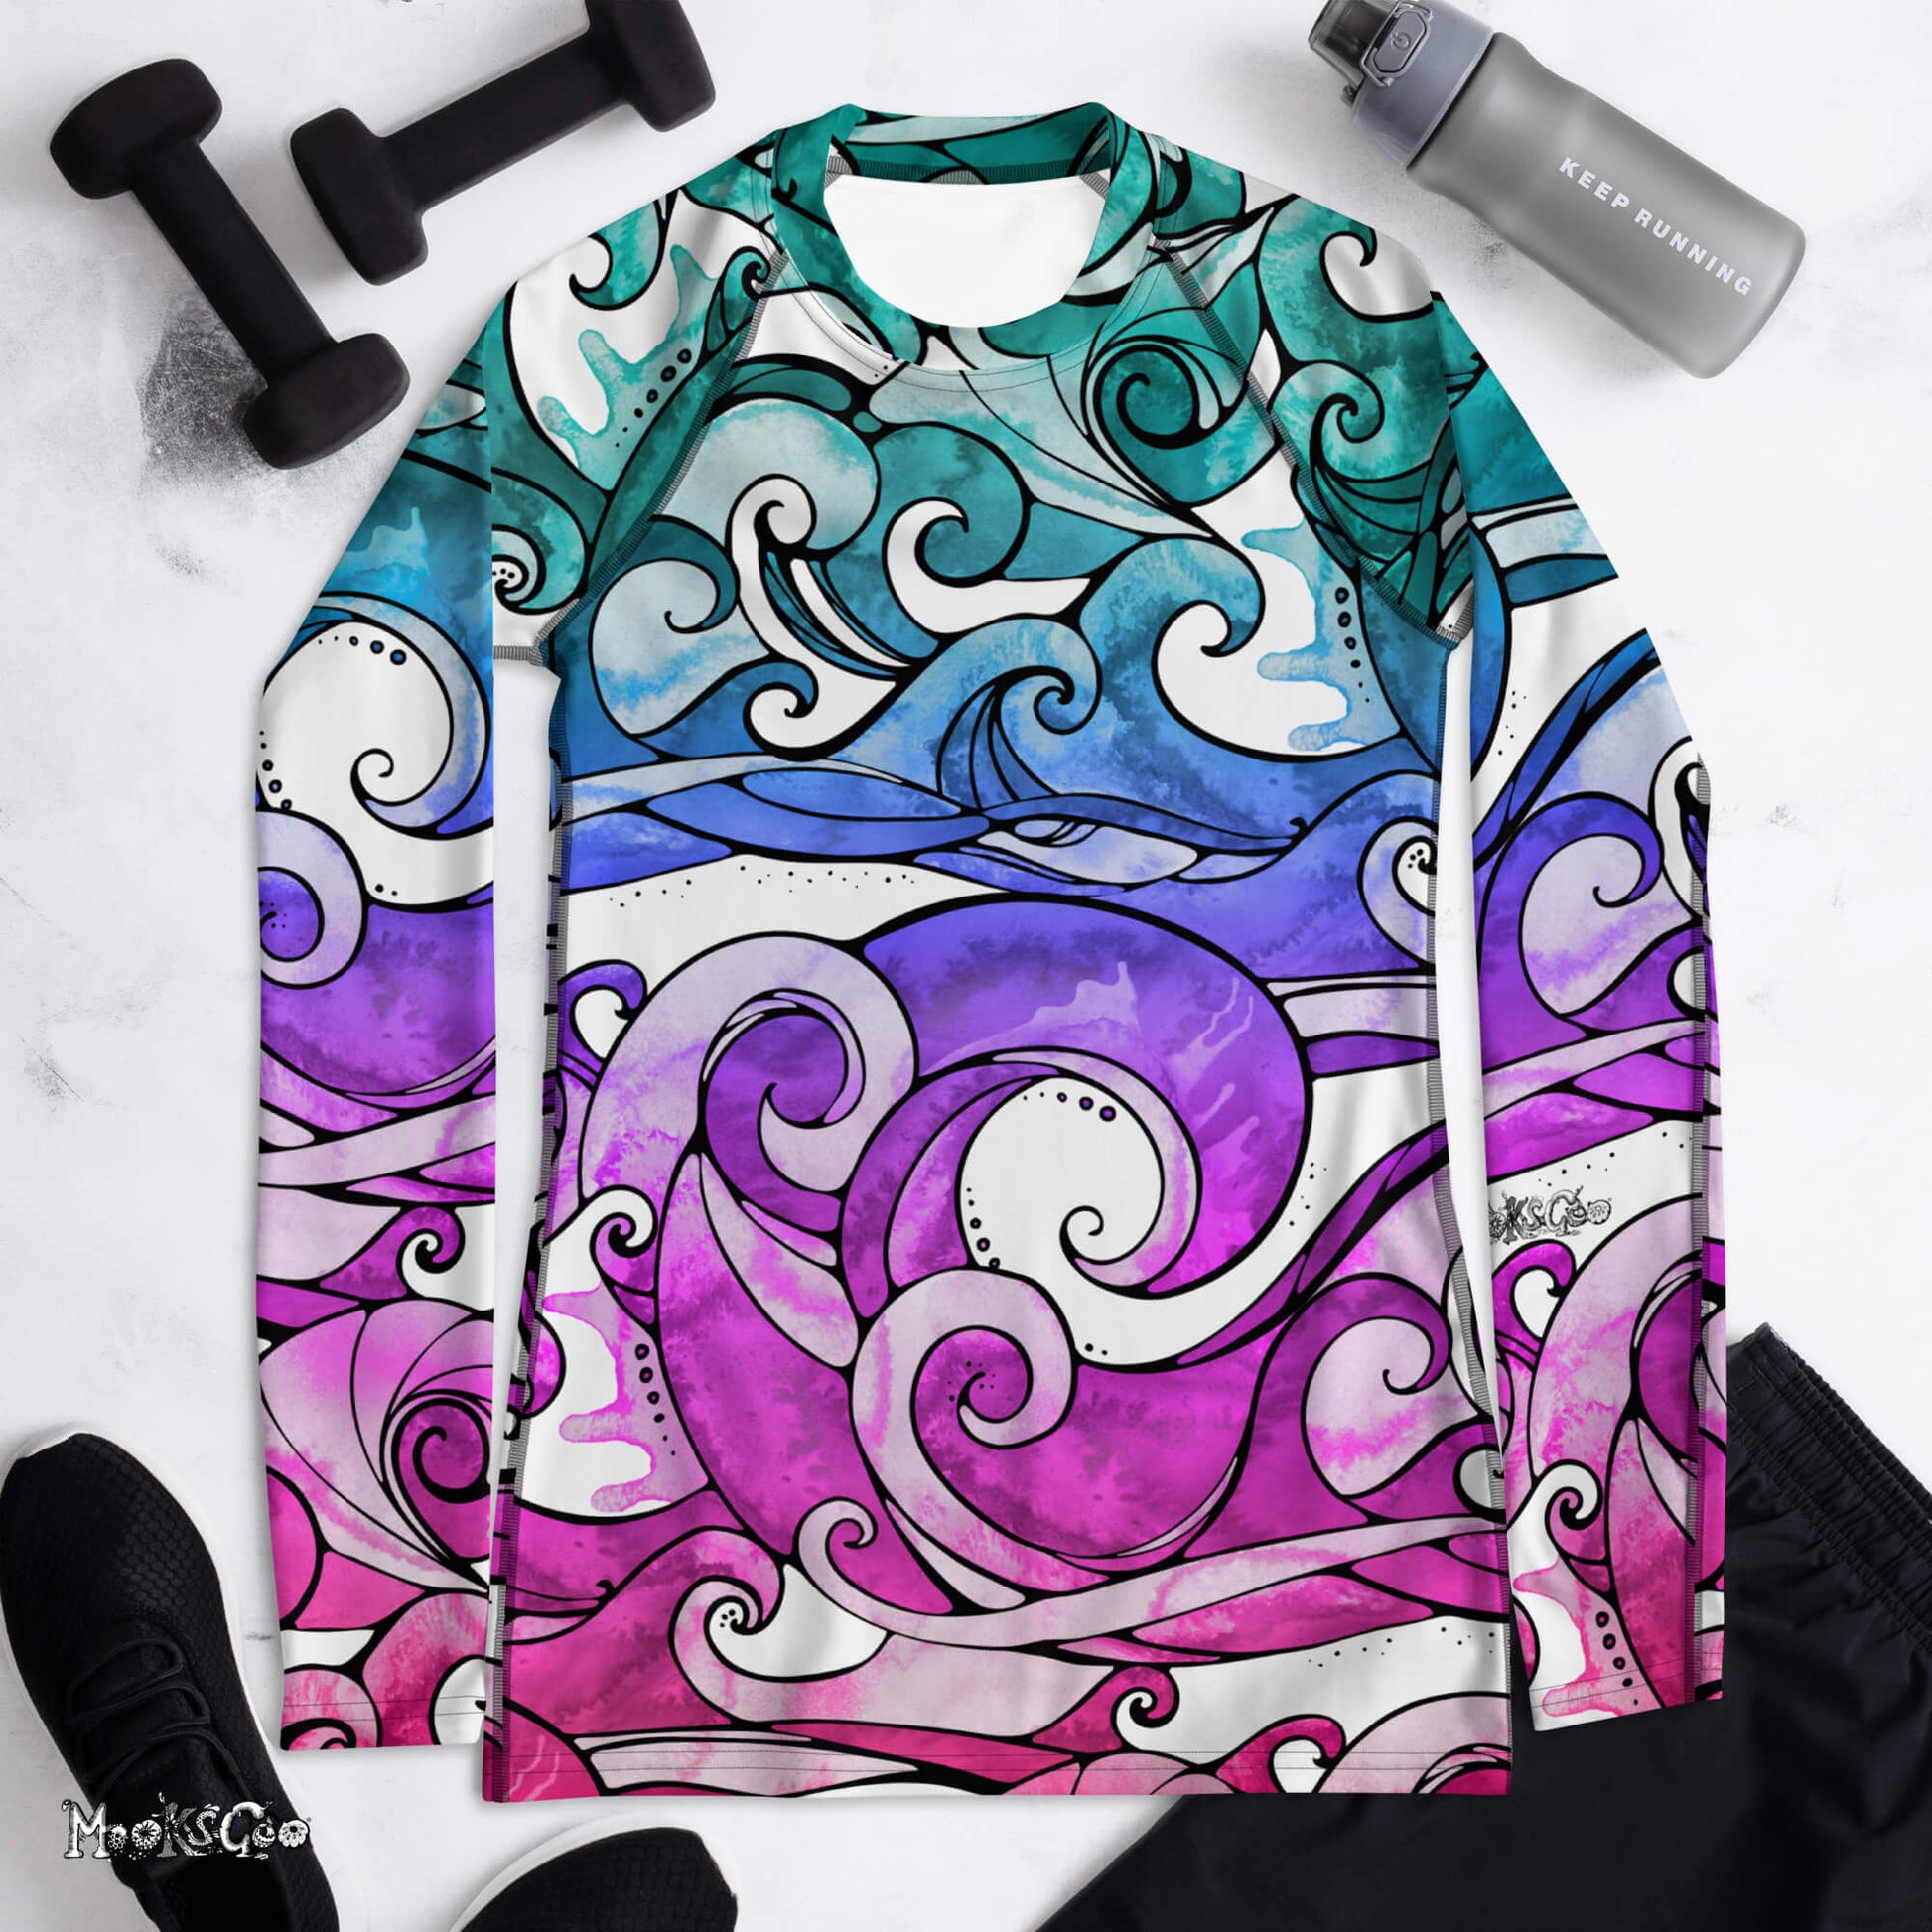 Sports rash guard for working out at the gym or at home. Funky rainbow wave pattern designed by MooksGoo.